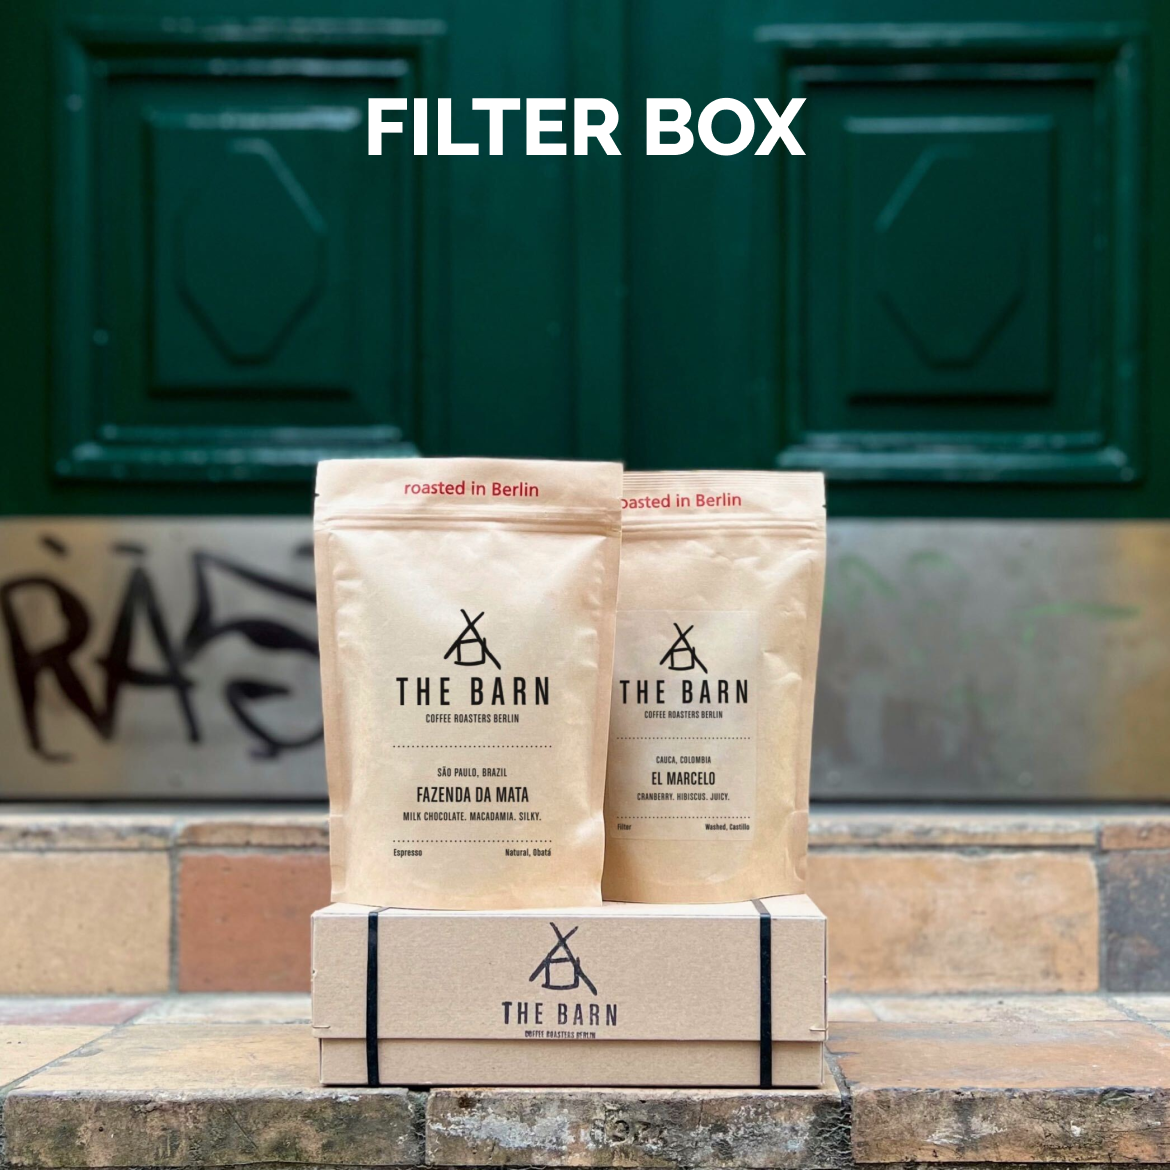 12 months curated subscription - Two 250g bags of freshly roasted filter coffee beans: Fazenda da Mata and El Marcelo on a packaging box from THE BARN Coffee Roasters